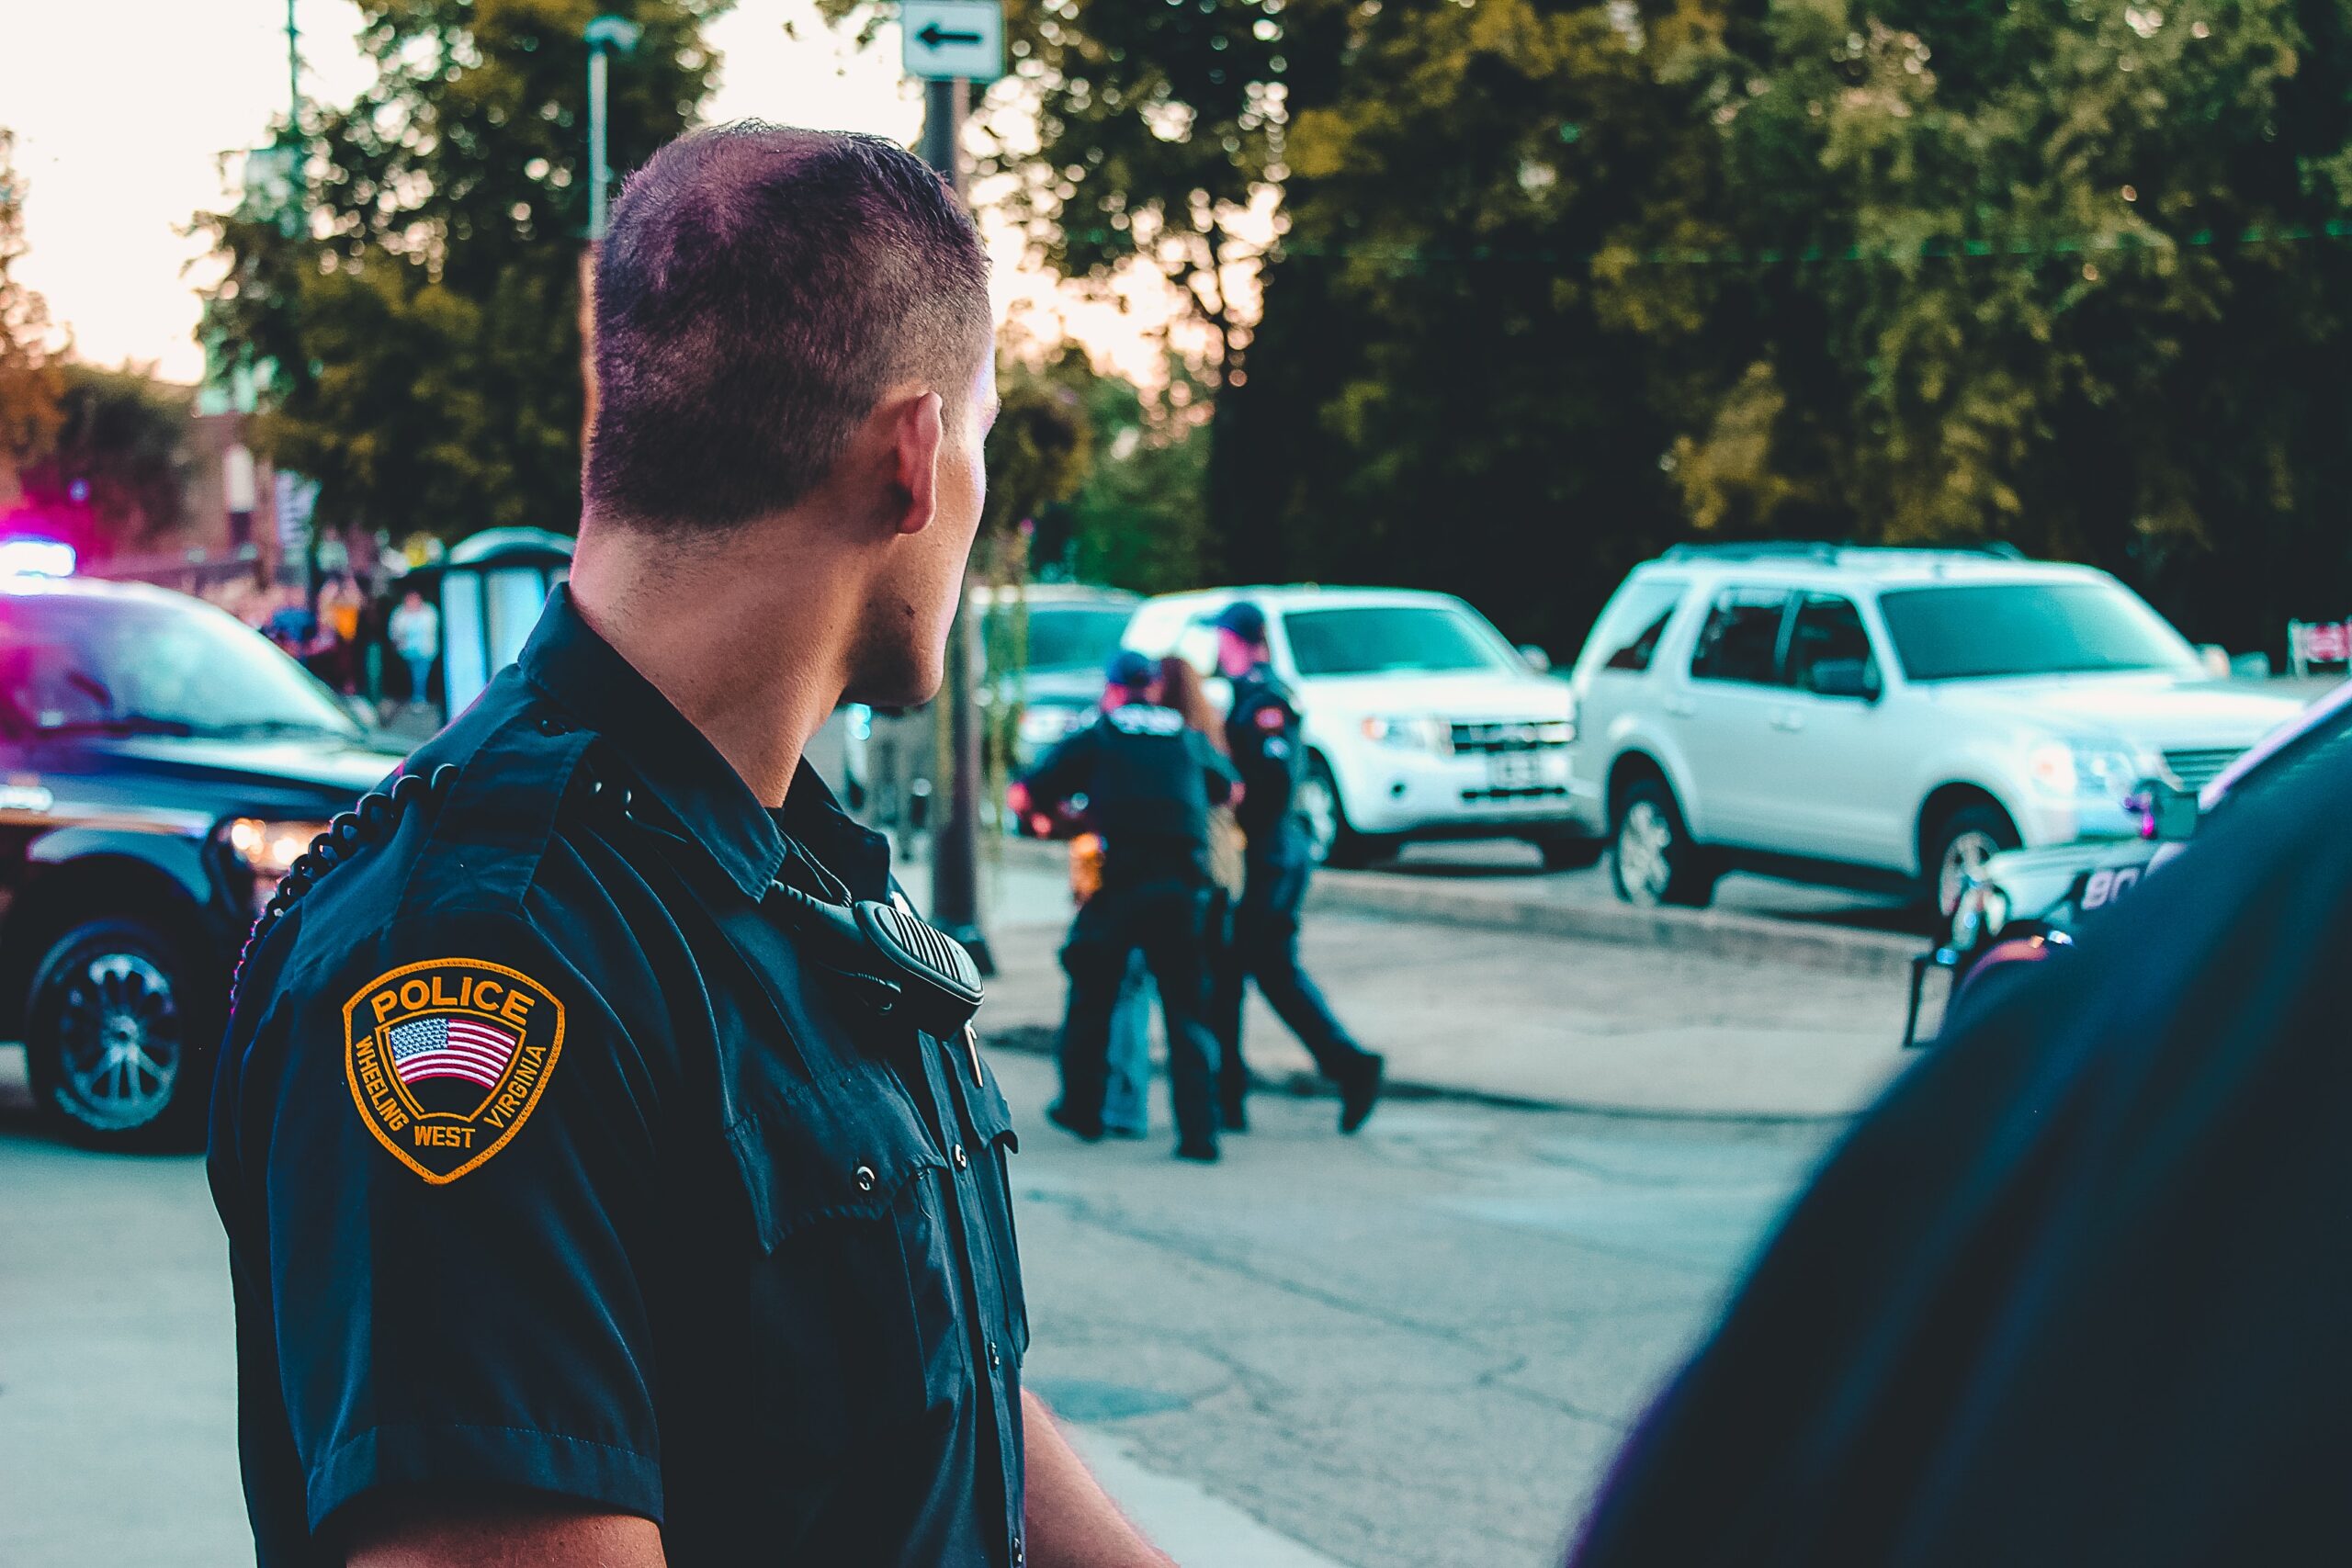 A police officer in uniform watches over a scene in New Jersey where other officers handle a high BAC DWI incident by the road, with police vehicles parked in the background.